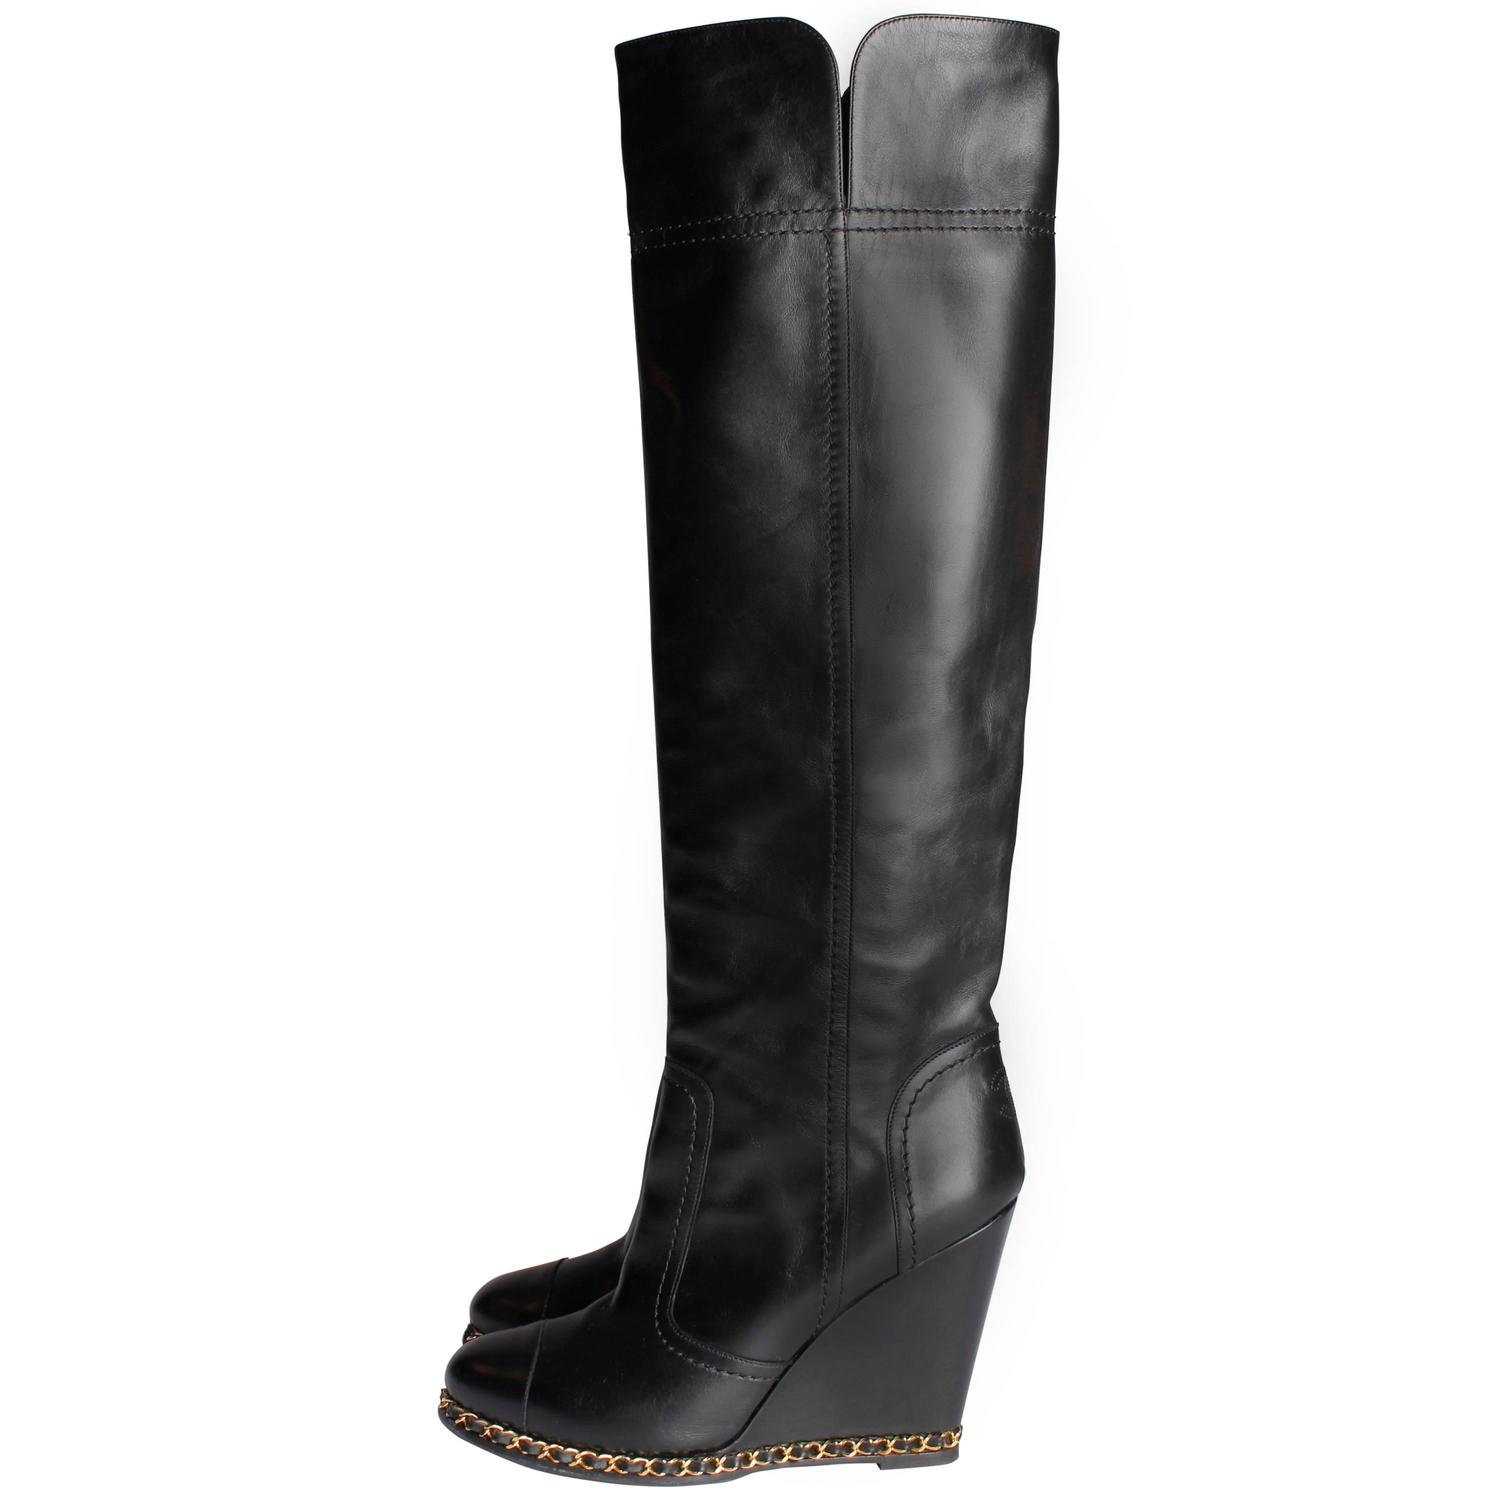 Chanel Chain Wedge Overknee Boots - black at 1stdibs